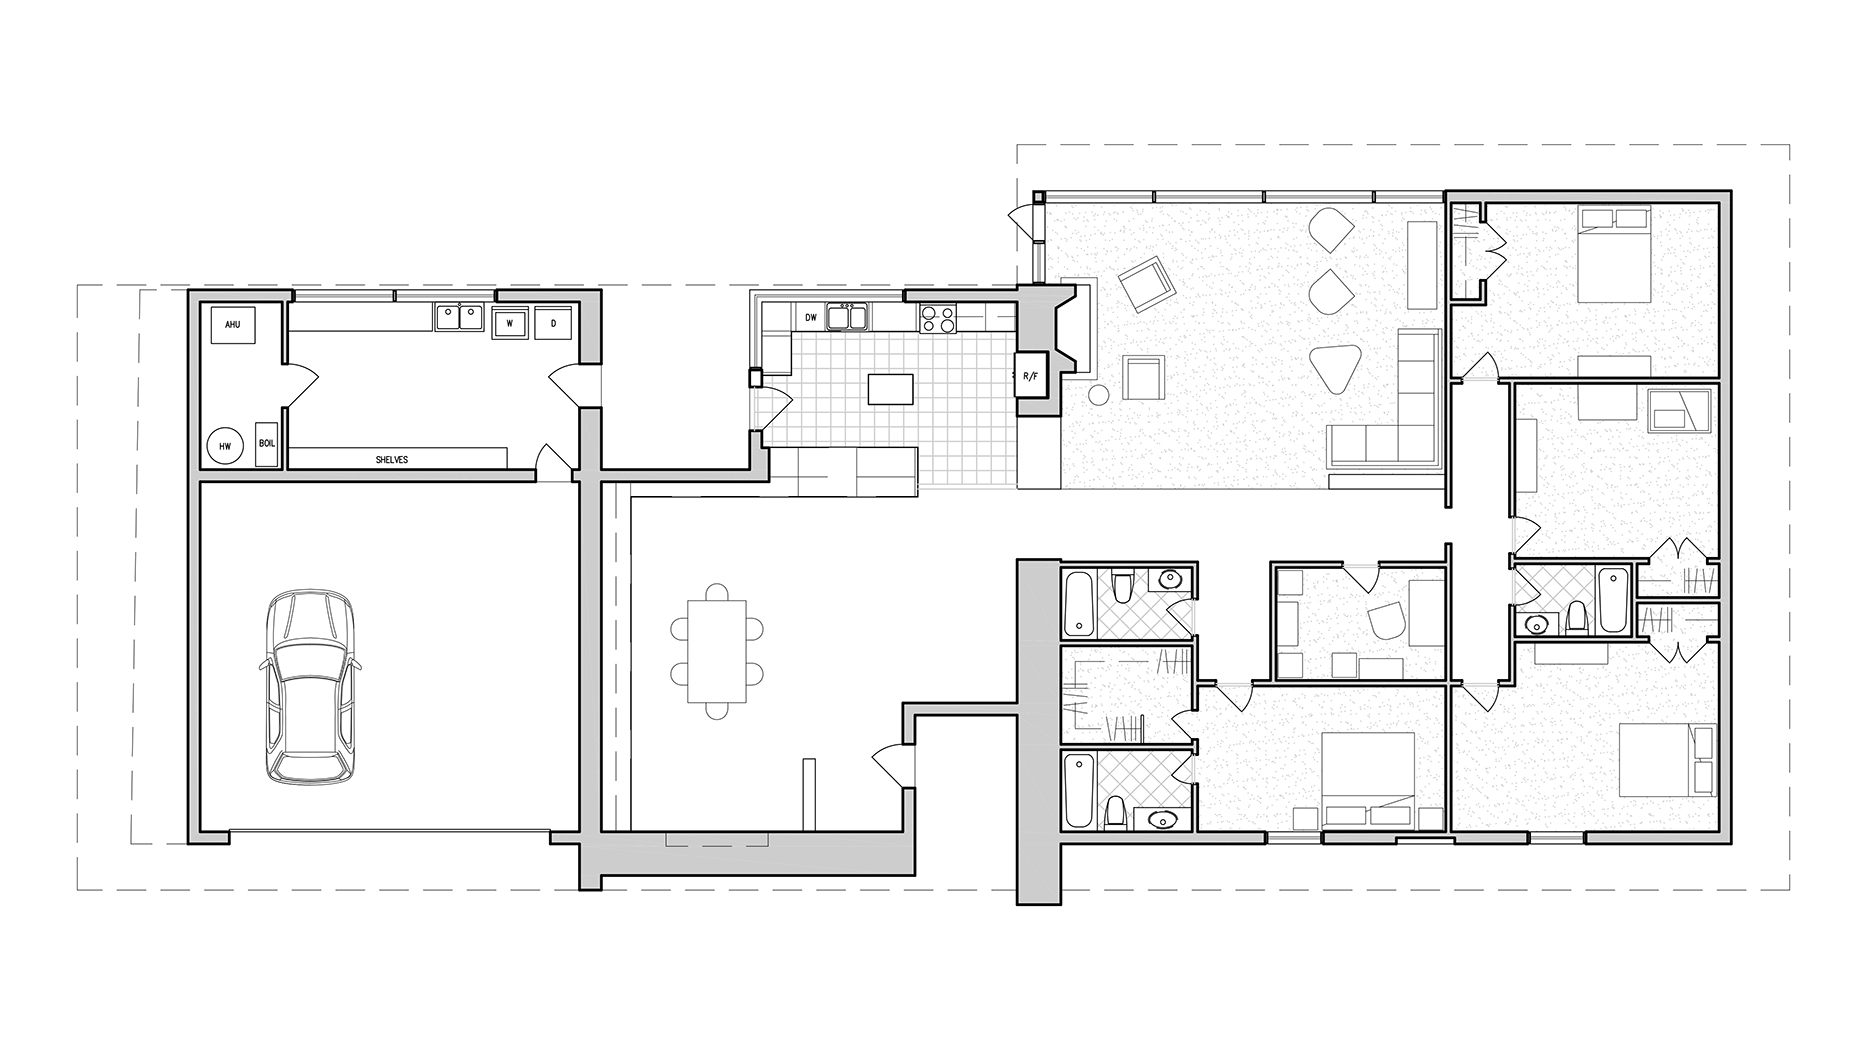 The Incredibles House Floor Plan by CityAperture on